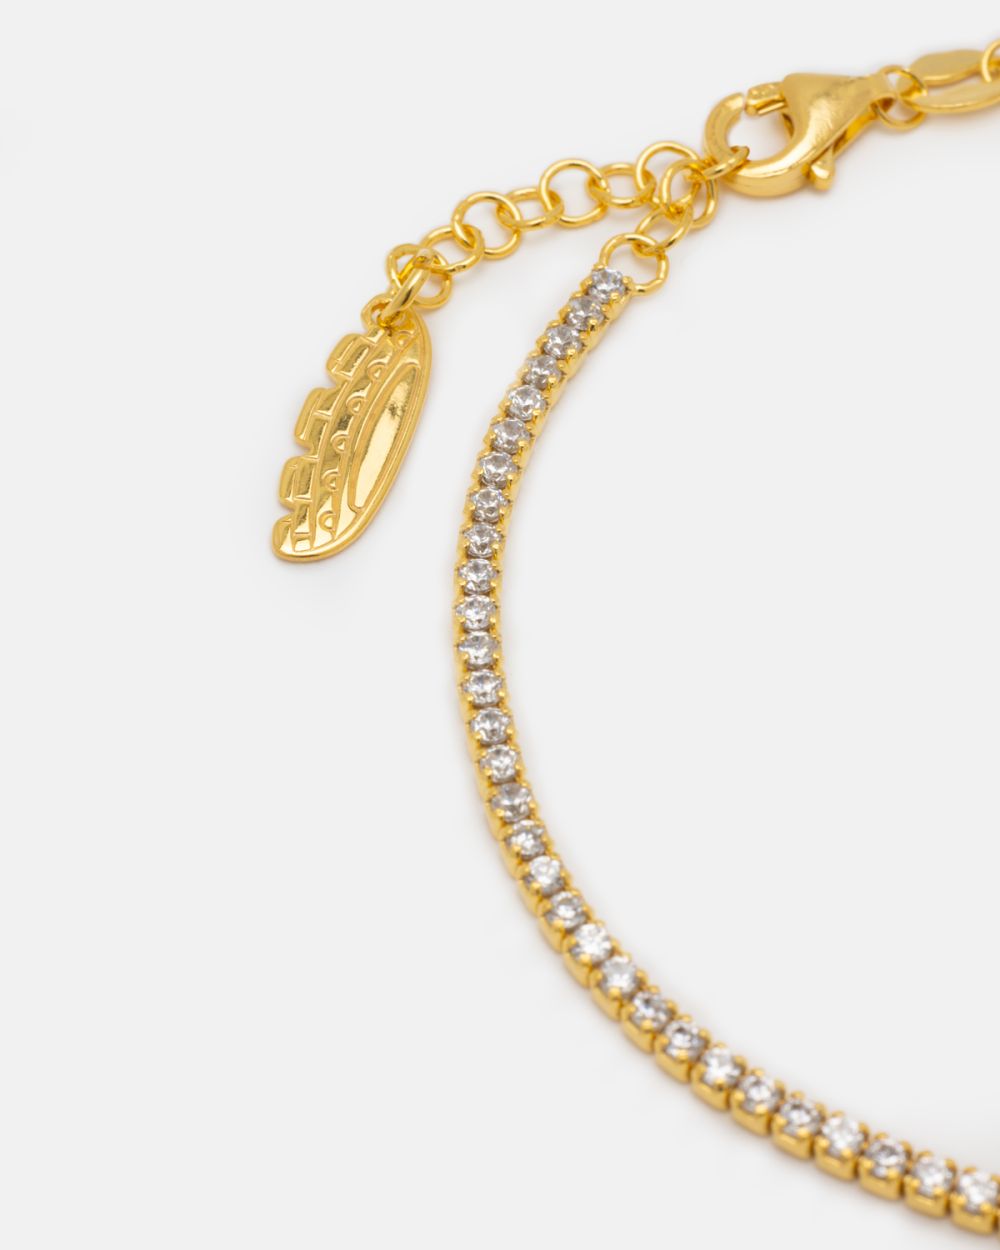 Luck Bracelet in Gold Plated Silver with Zirconias